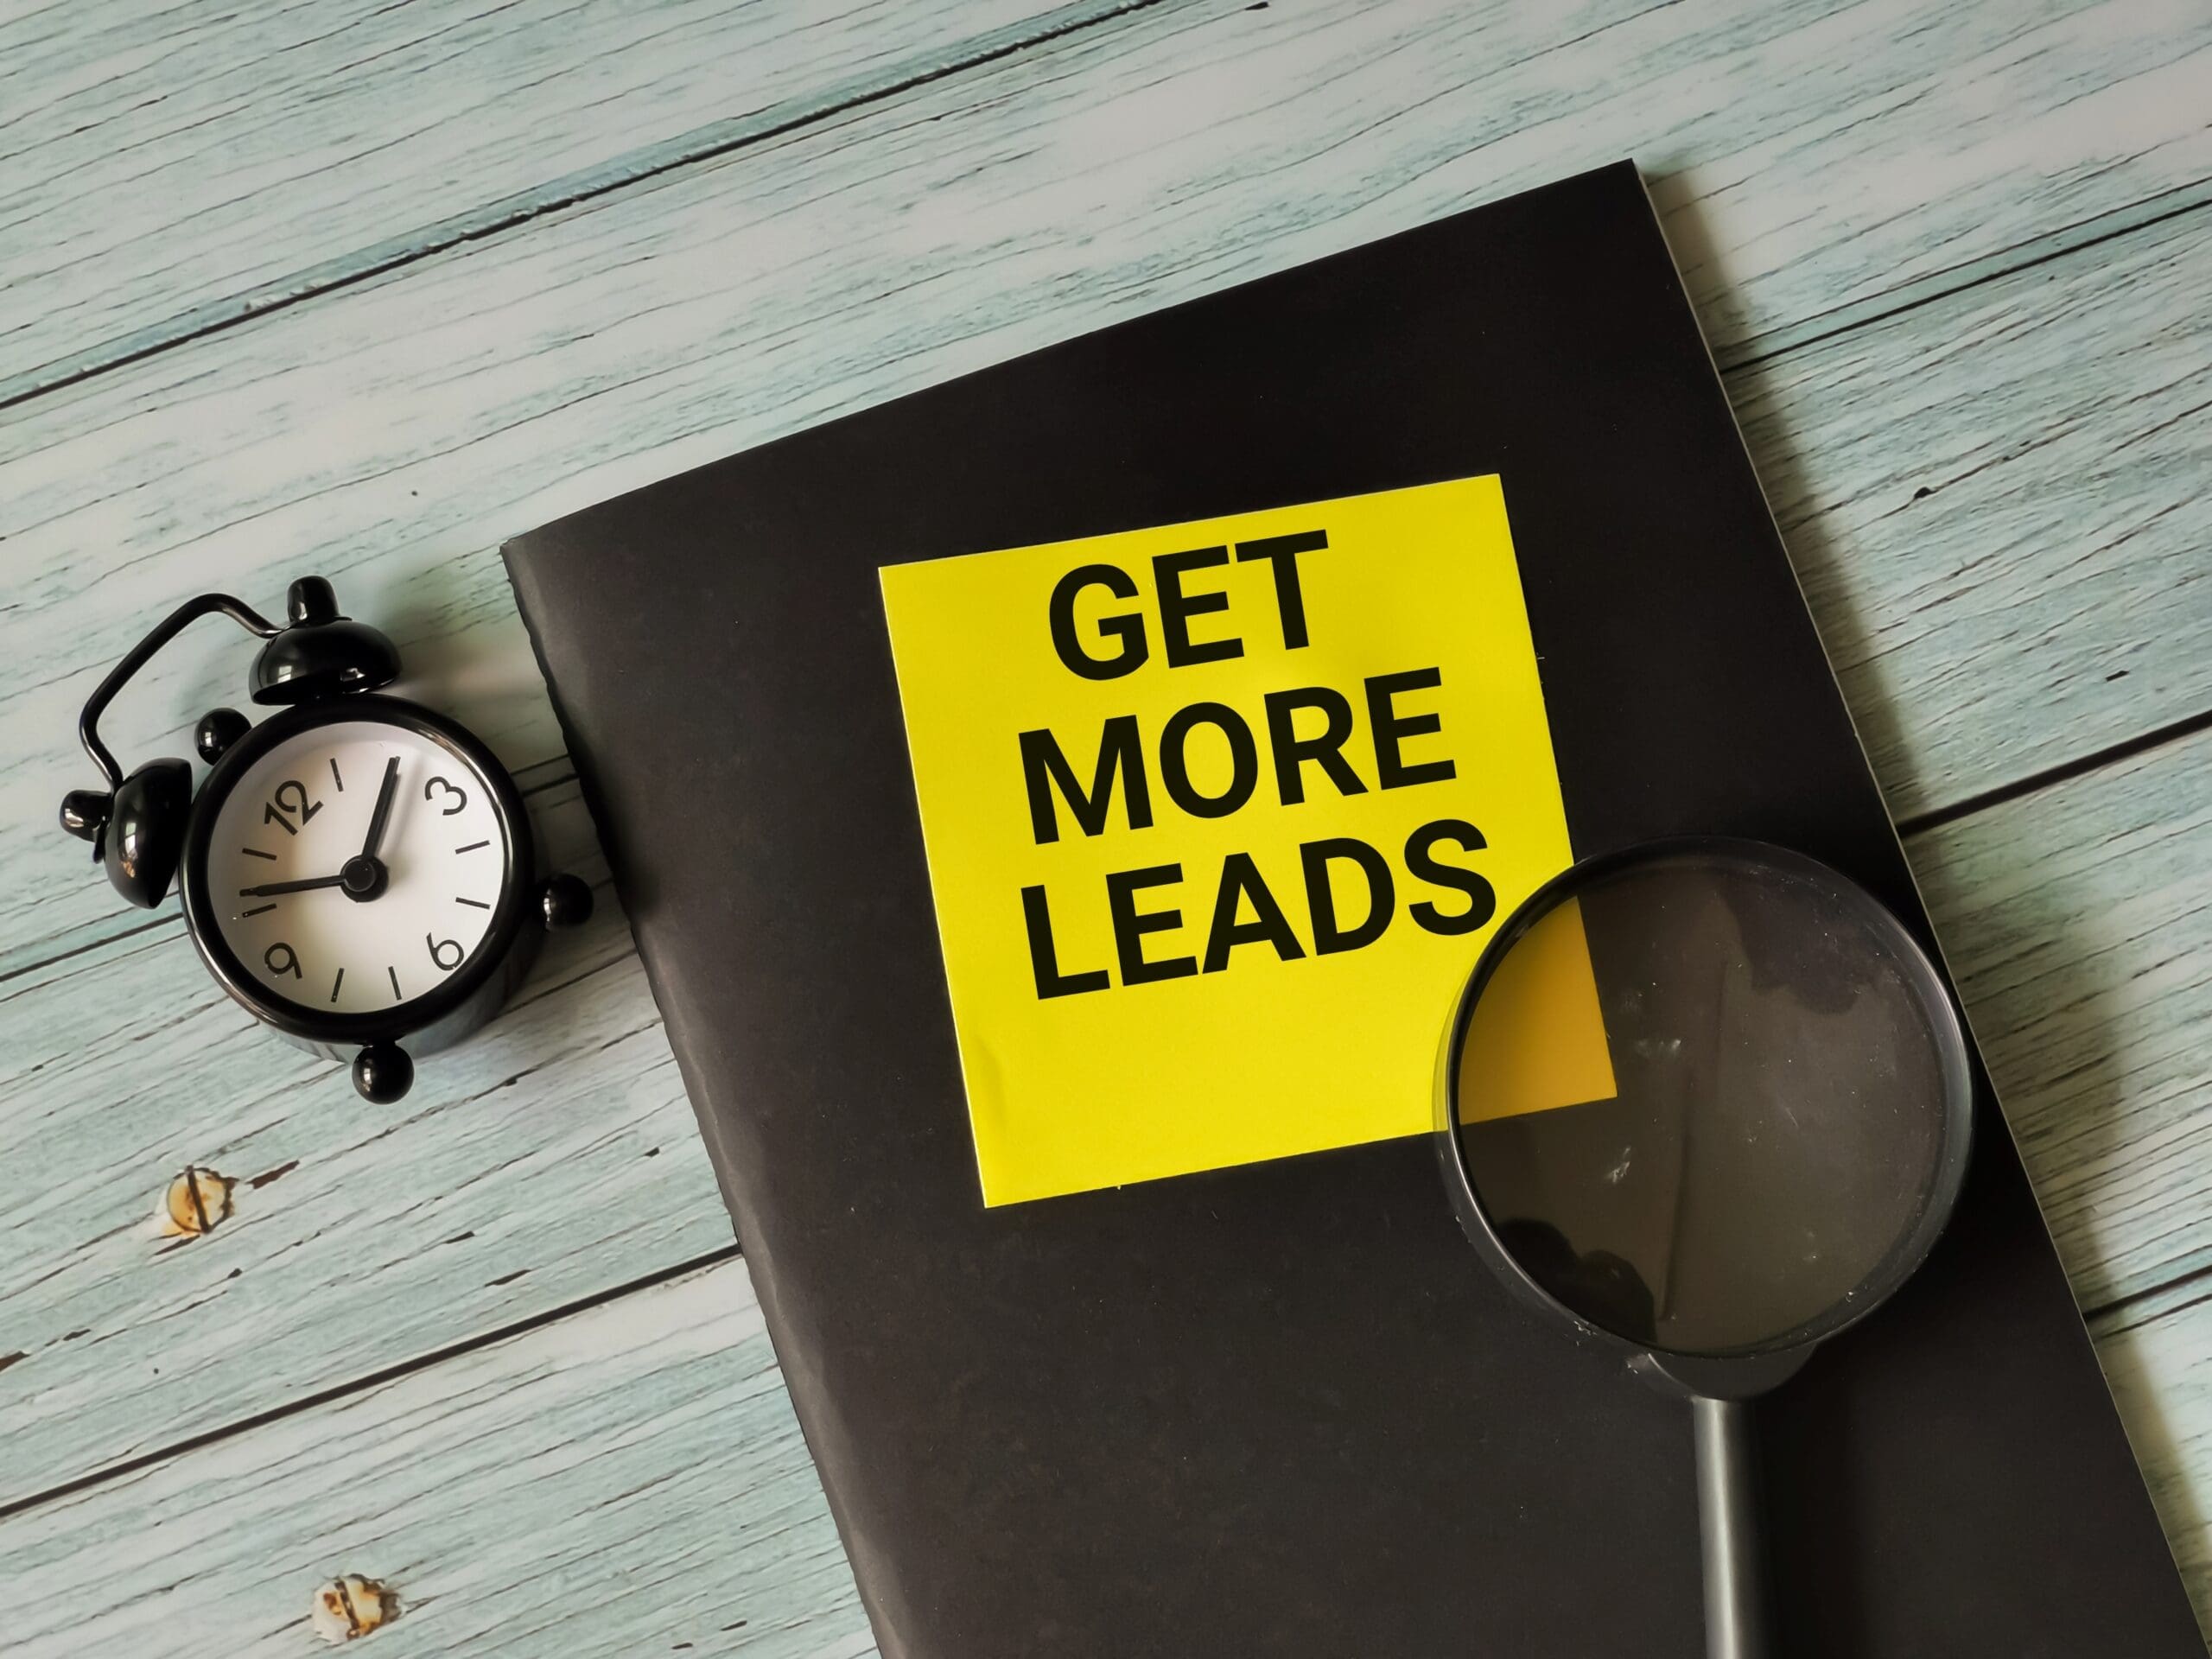 How to Qualify Real Estate Leads Like a Pro: A Comprehensive Guide